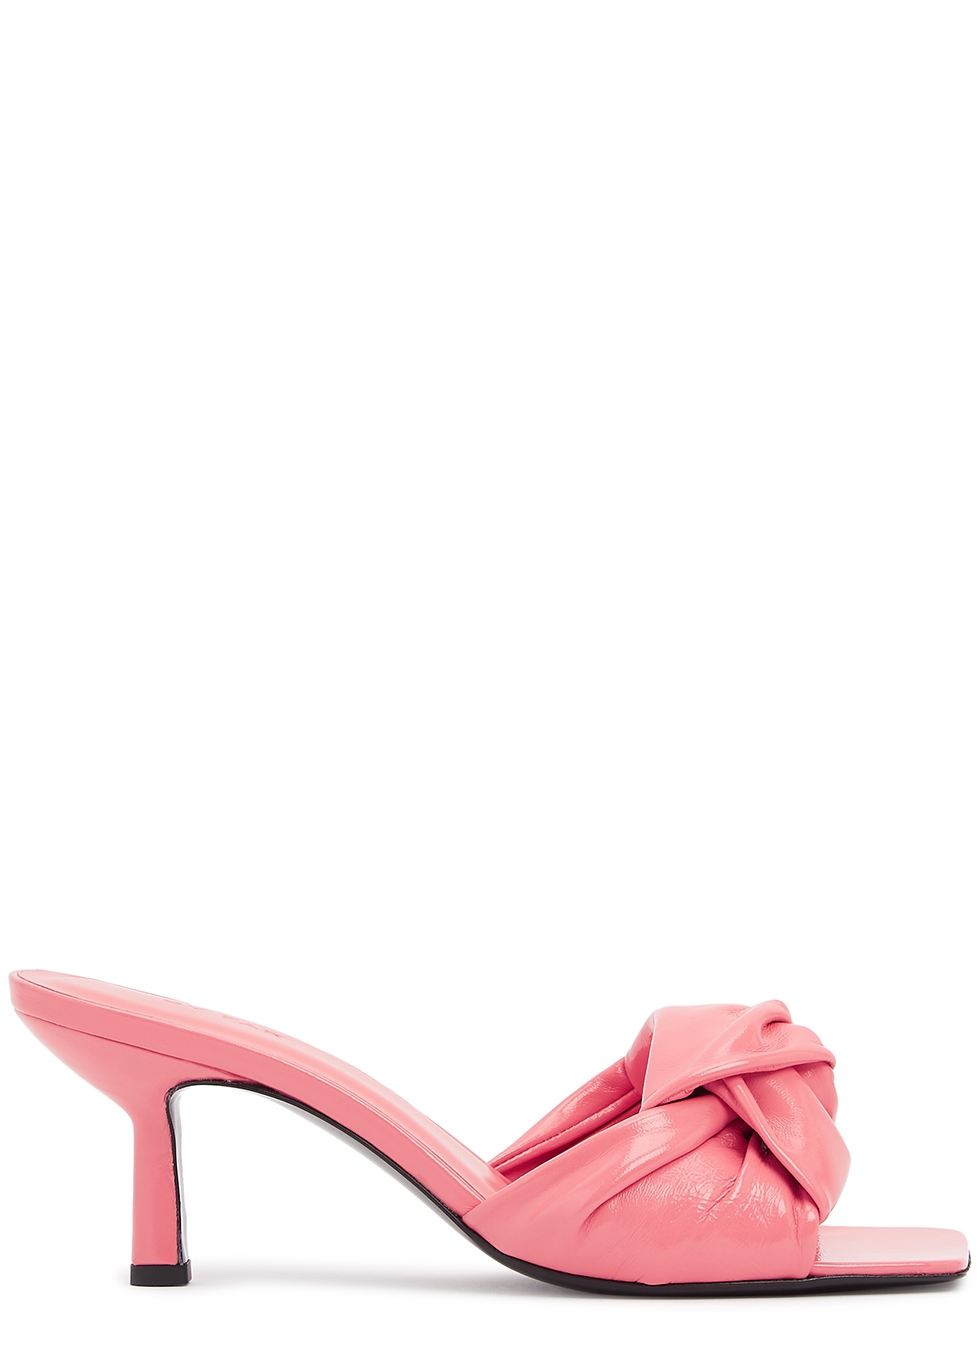 Lana 75 pink glossed leather mules